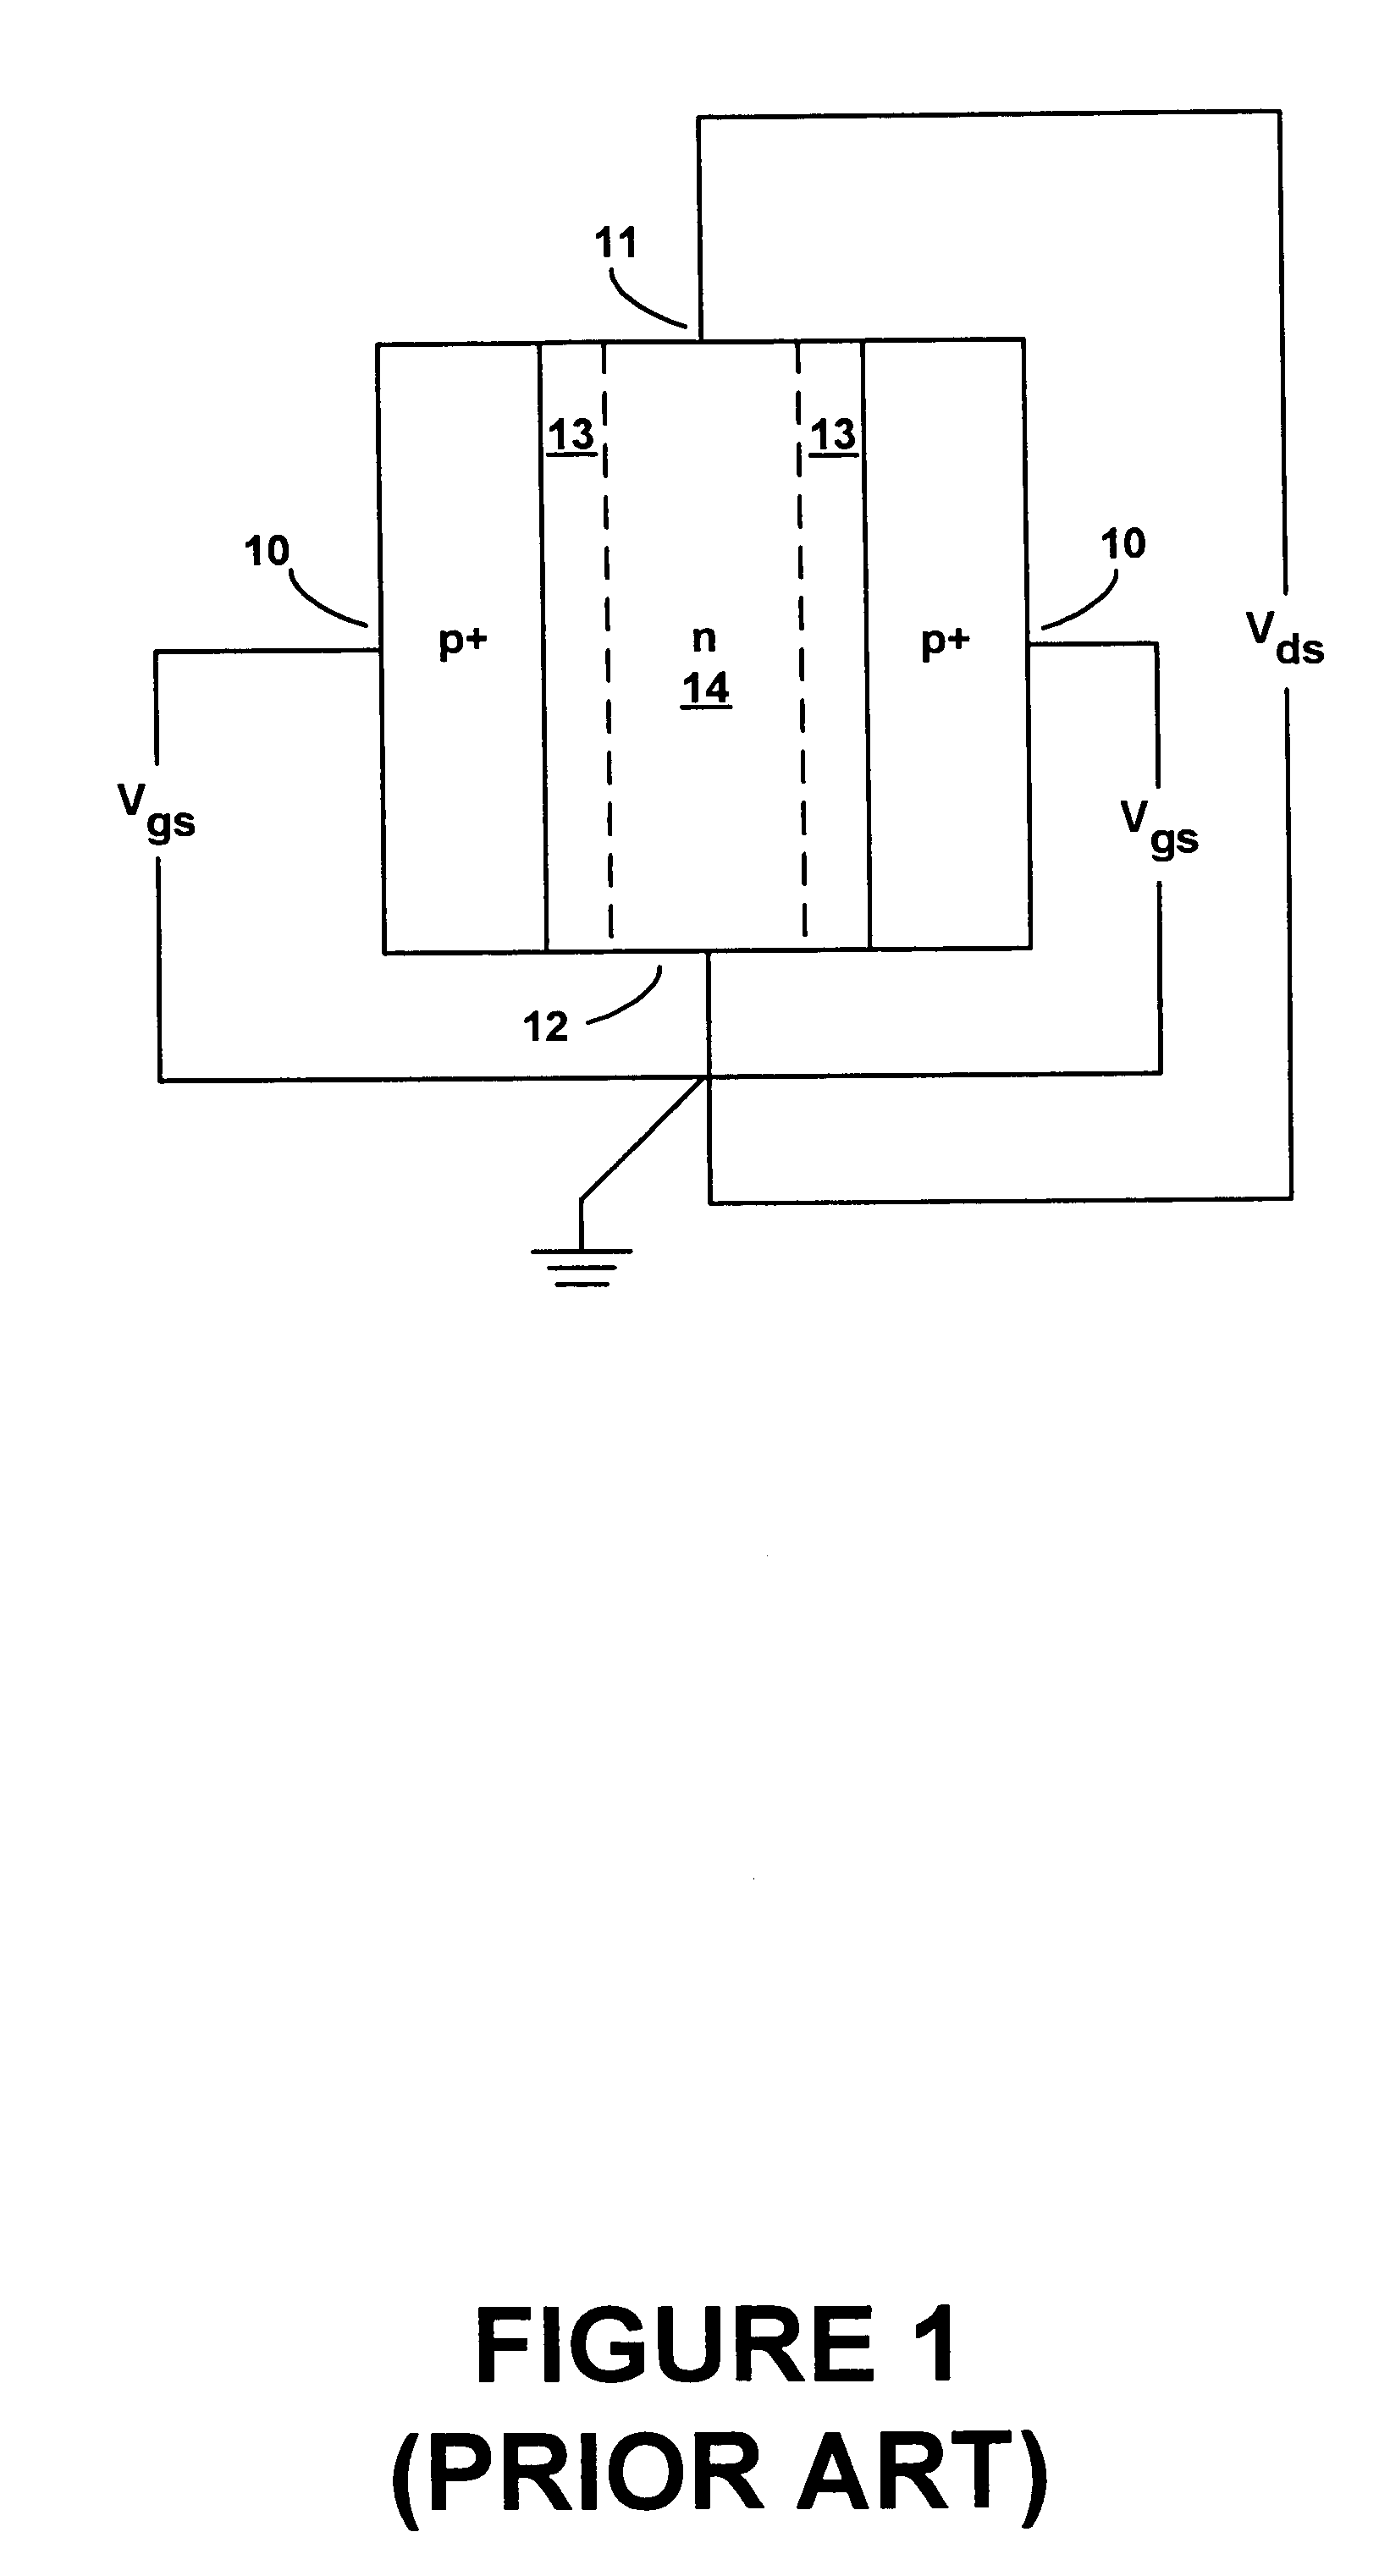 Method for a junction field effect transistor with reduced gate capacitance